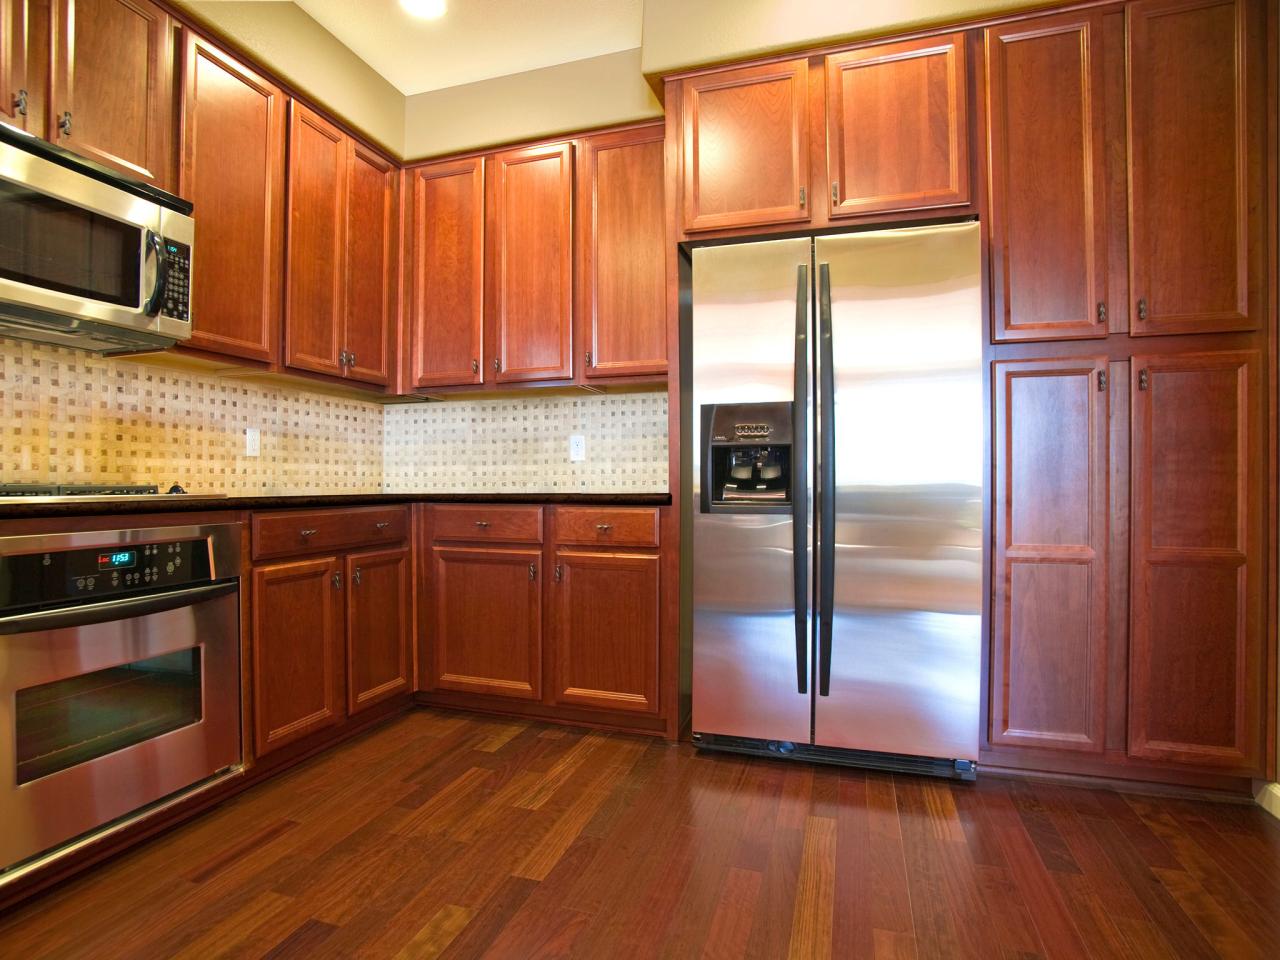 Oak Kitchen Cabinets Pictures Ideas Tips From HGTV HGTV